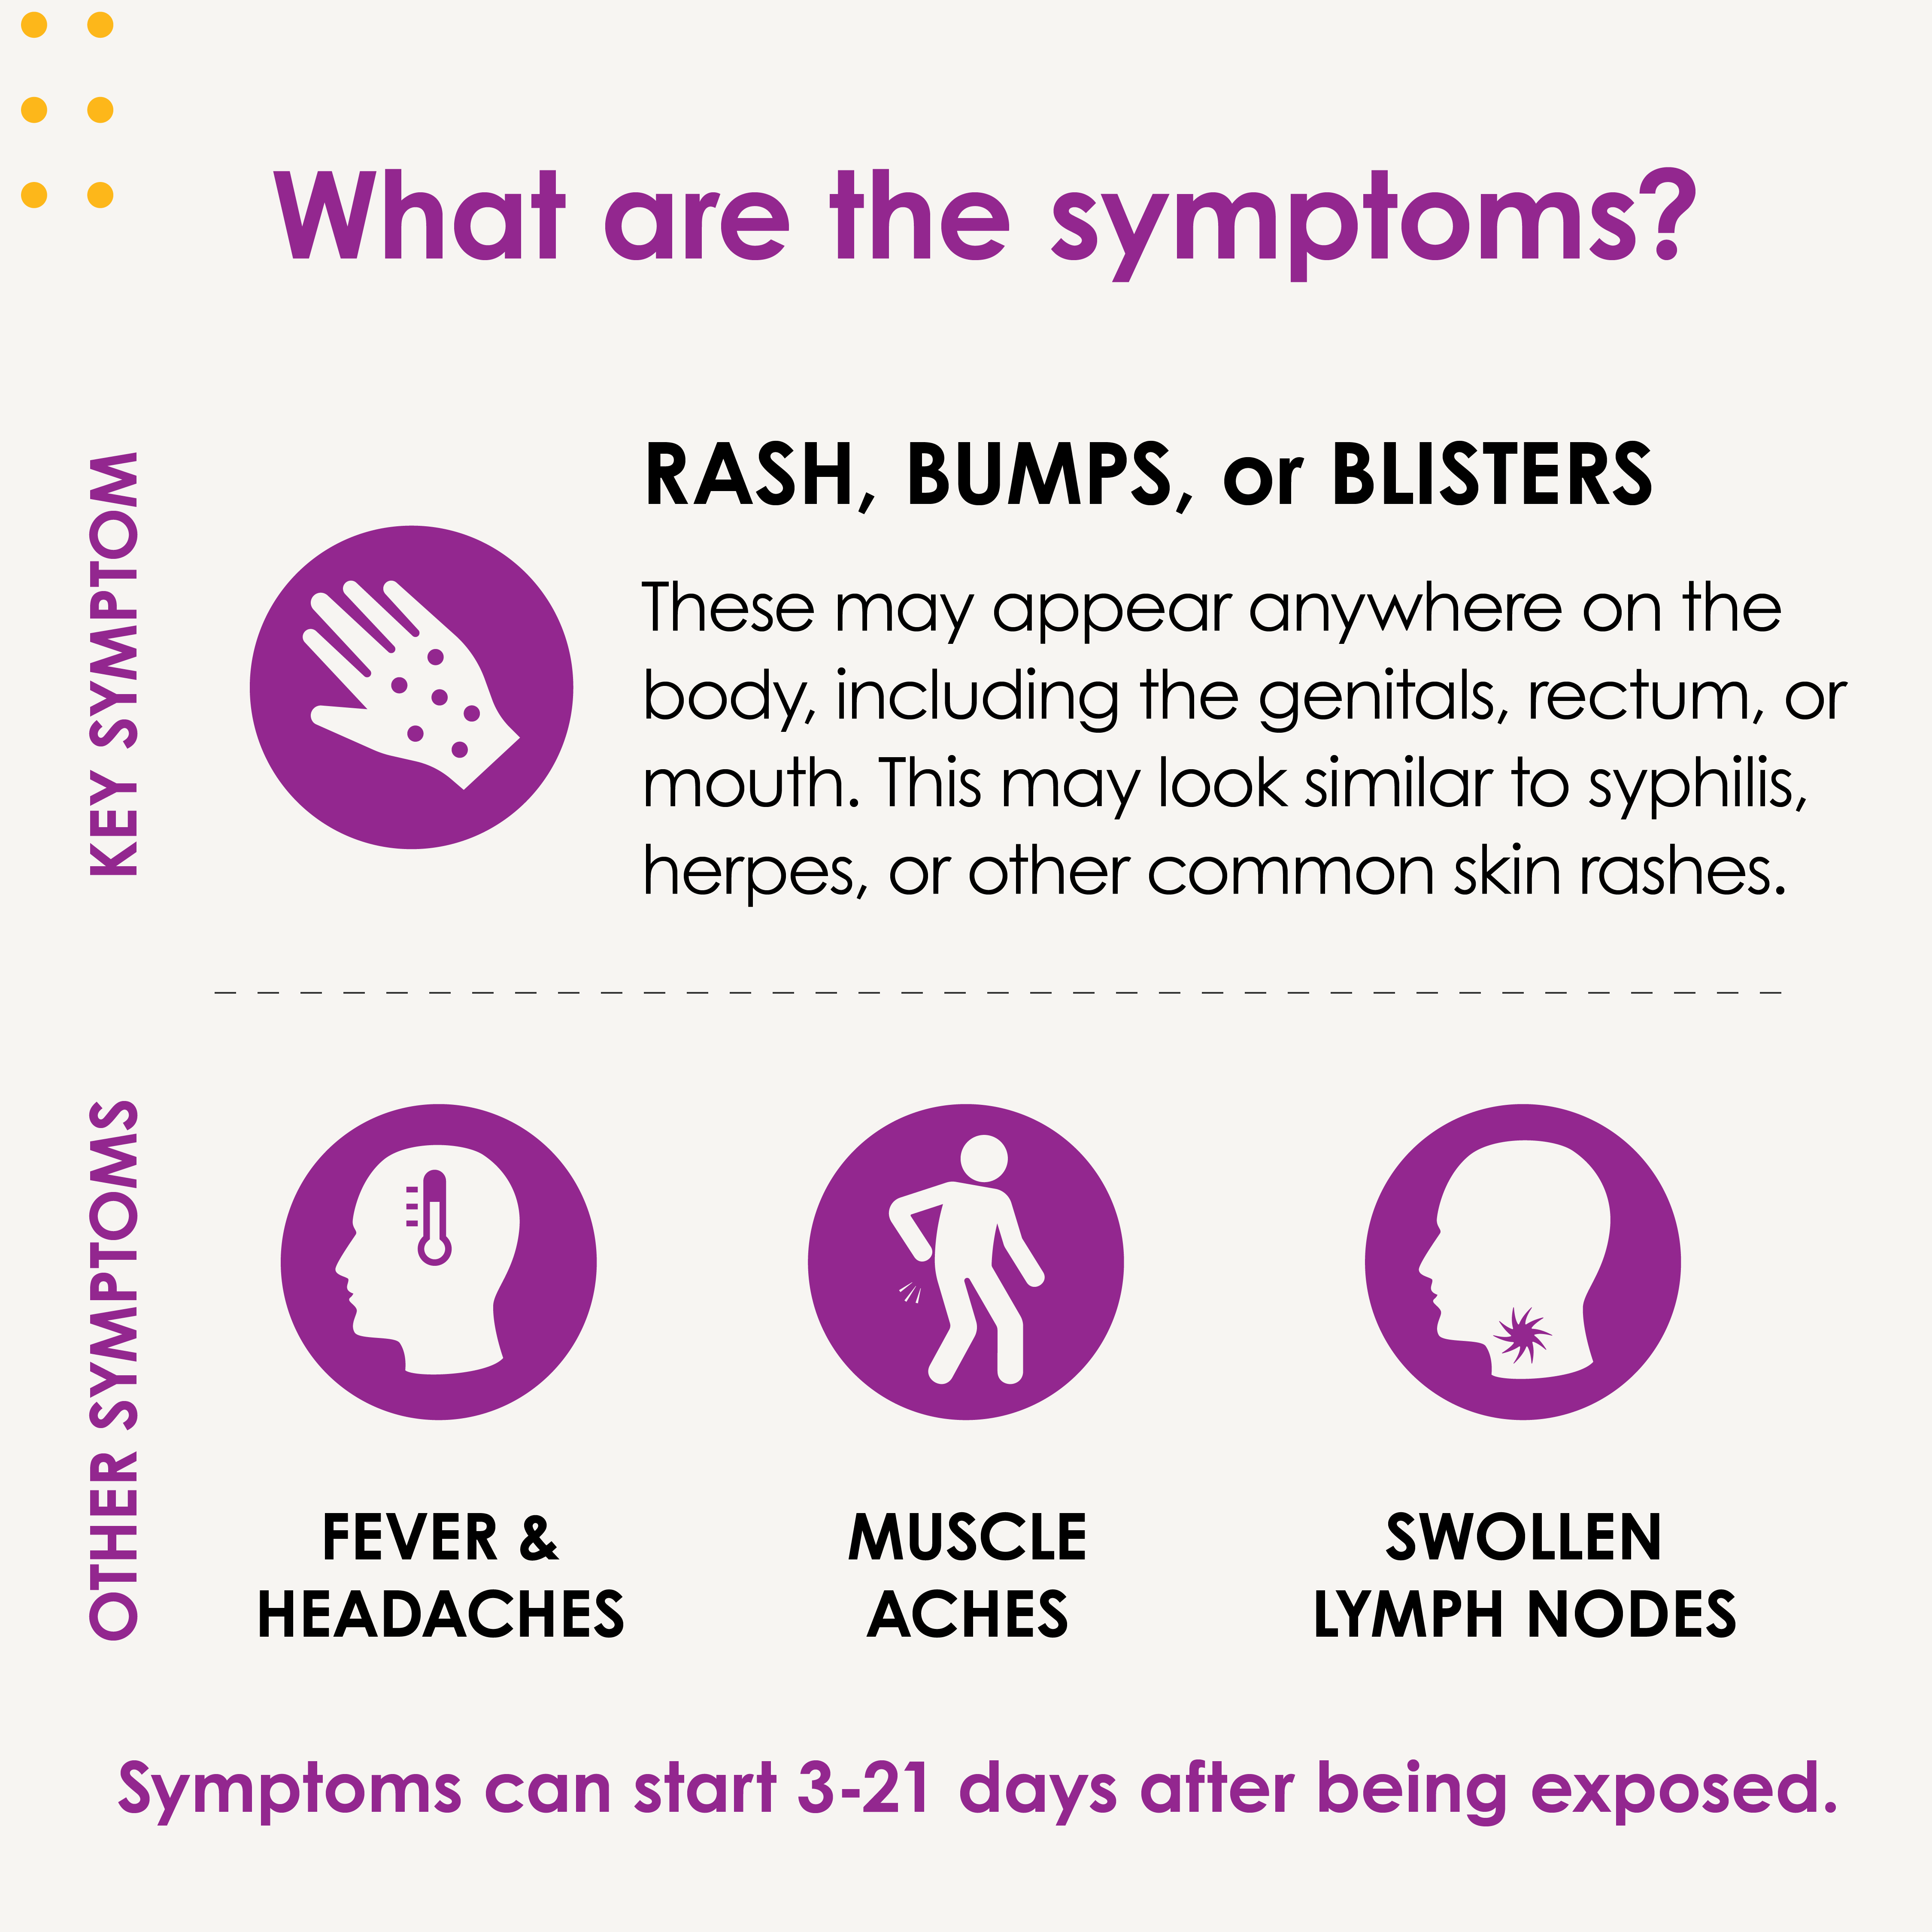 What are the symptoms?